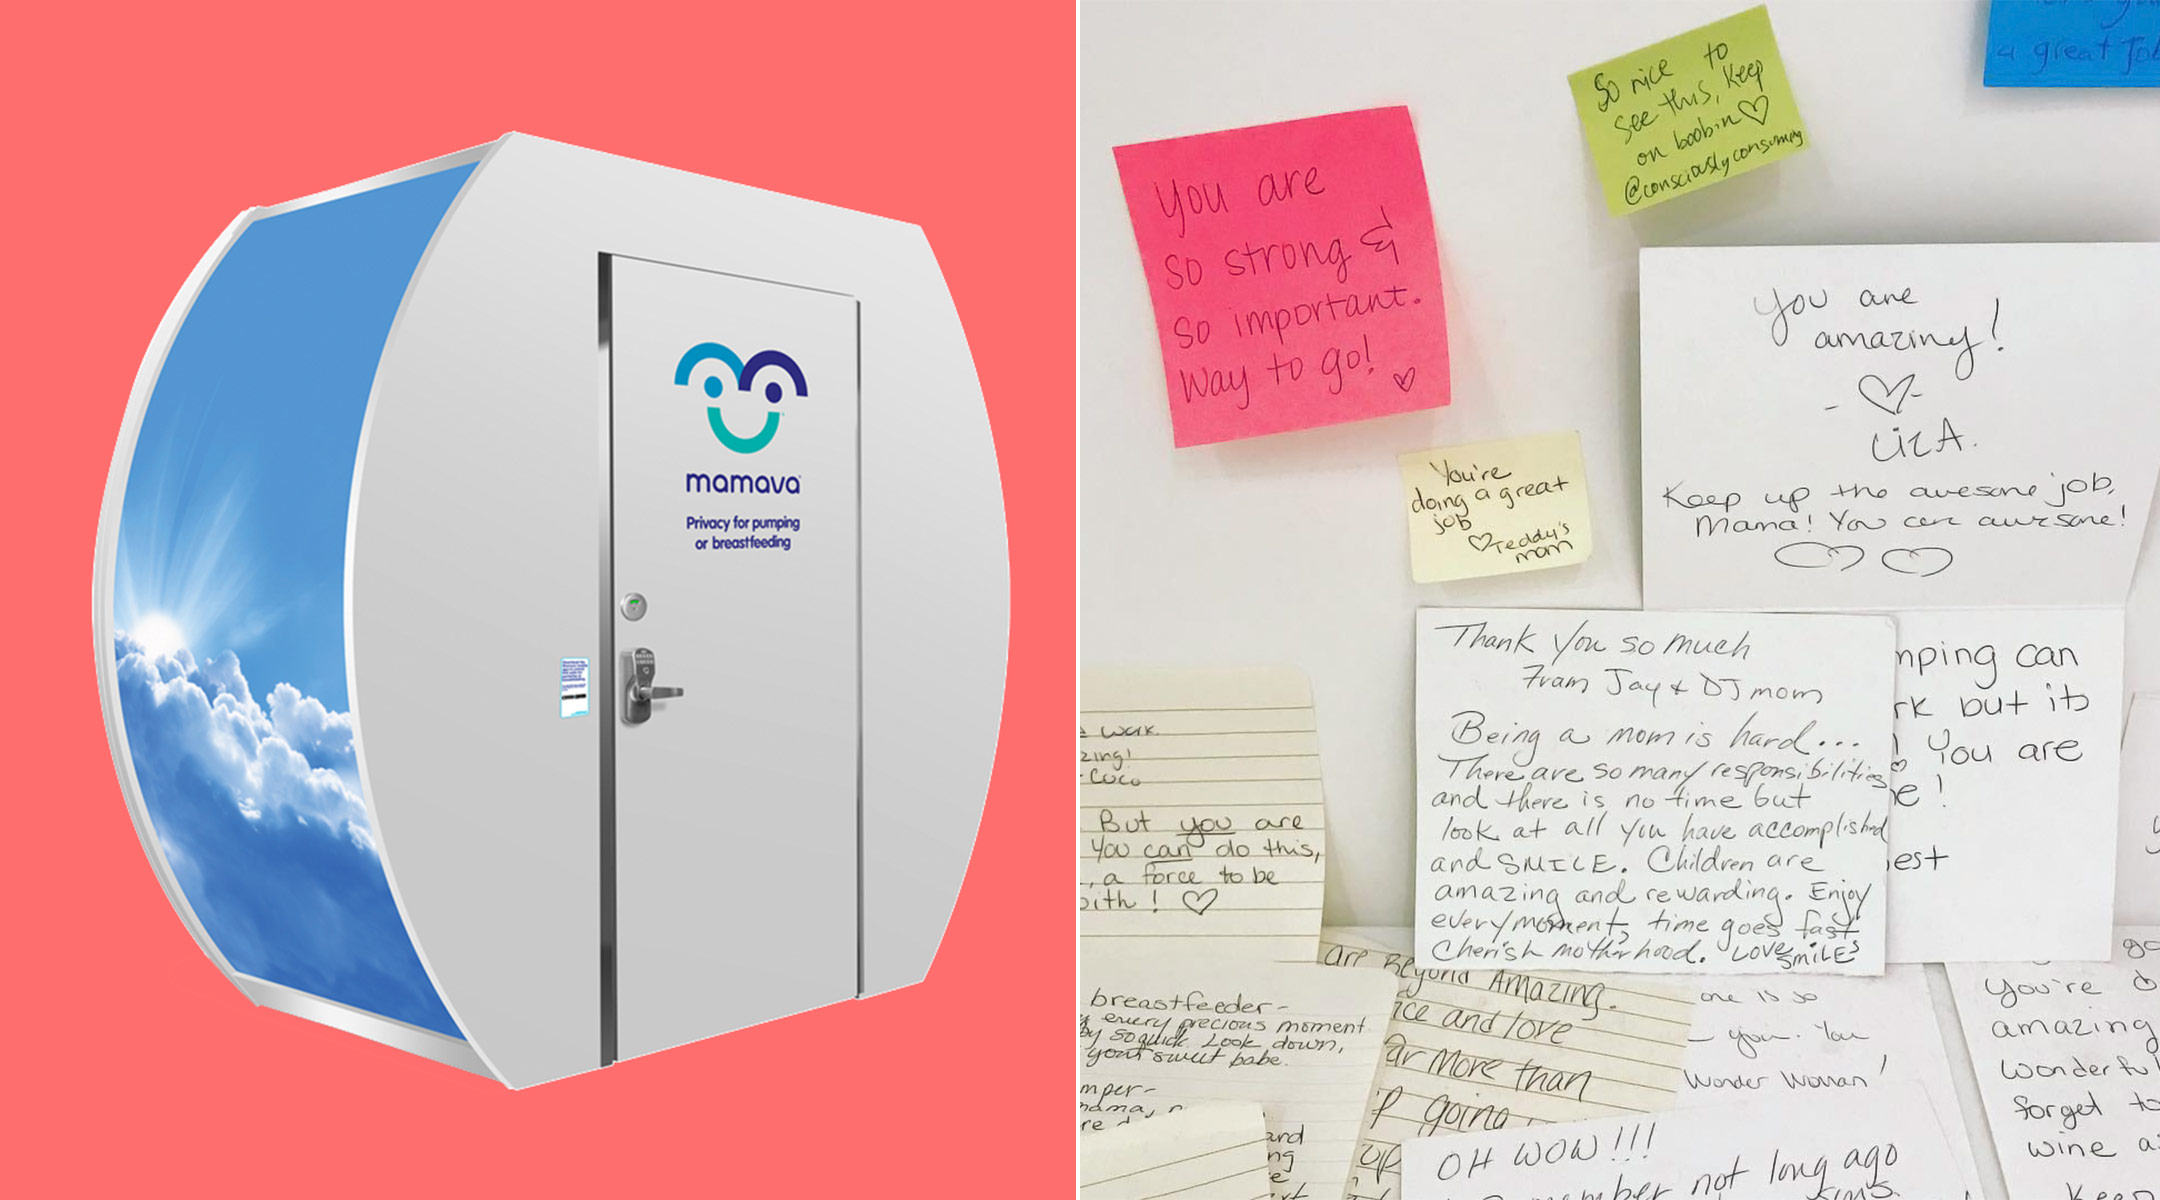 mamava breastfeeding room, moms have started leaving encouraging notes to each other